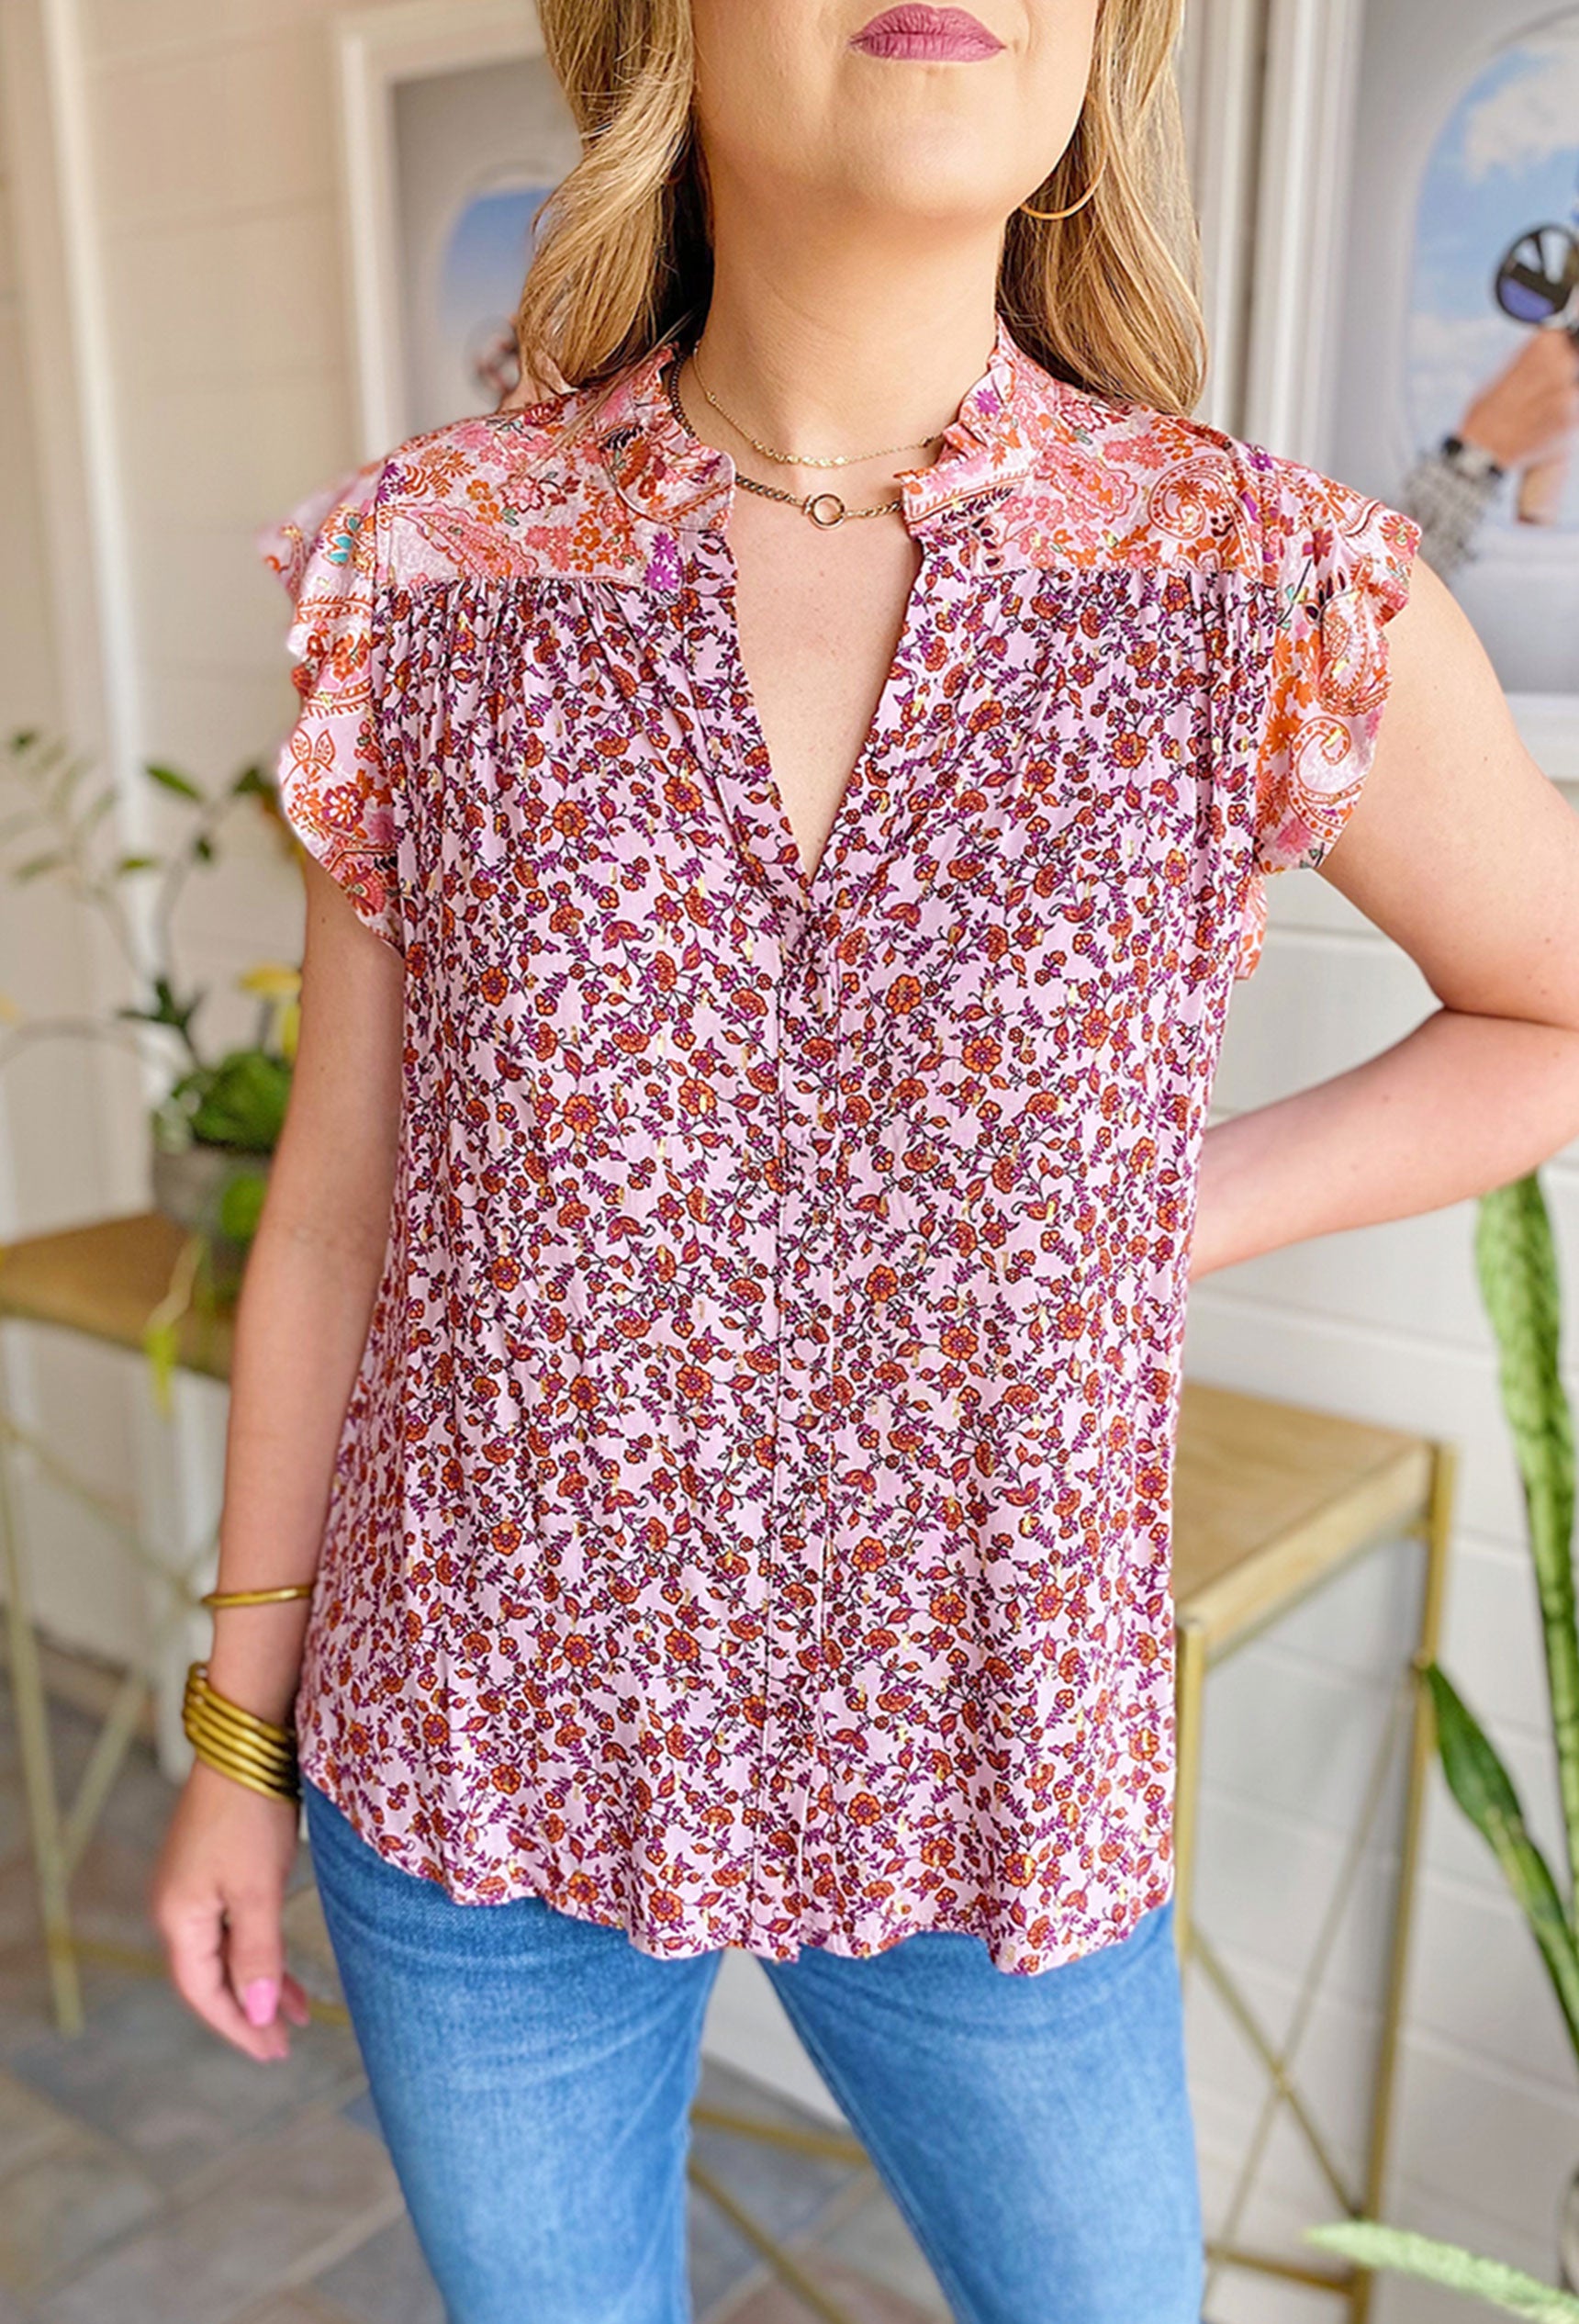 Summertime Blooms Blouse, purple blouse, small floral detailing, metallic gold flakes threaded in the blouse, lined v-neckline